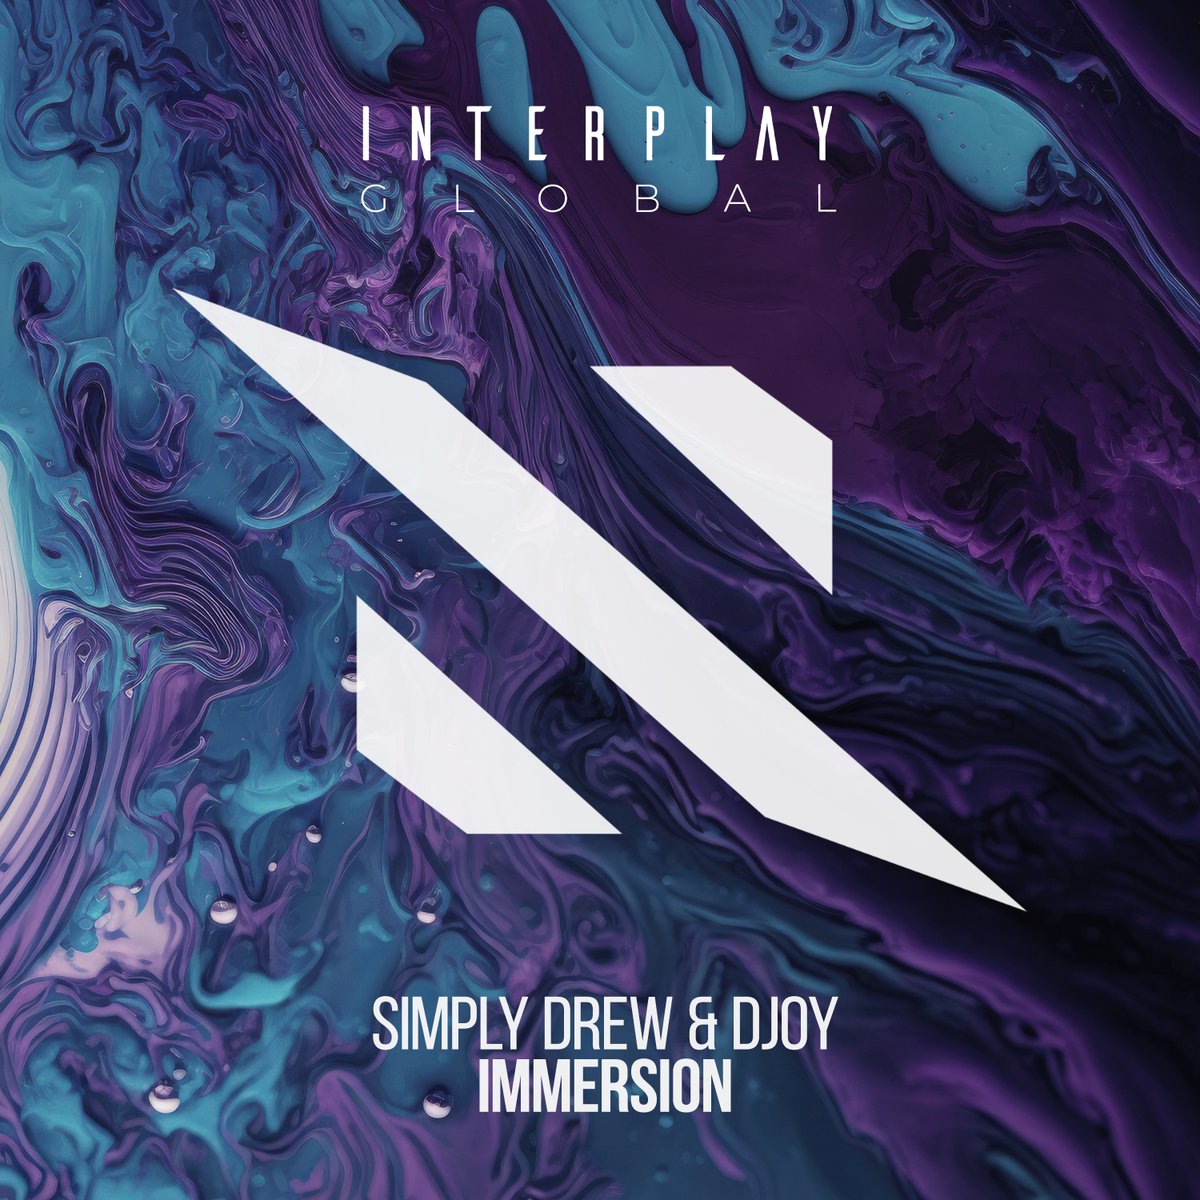 A massive trance collaboration 'Immersion' by Simply Drew and Djoy is coming up tomorrow on Interplay Global 🔥 #interplayrec Pre-order: interplay.ffm.to/itpg163